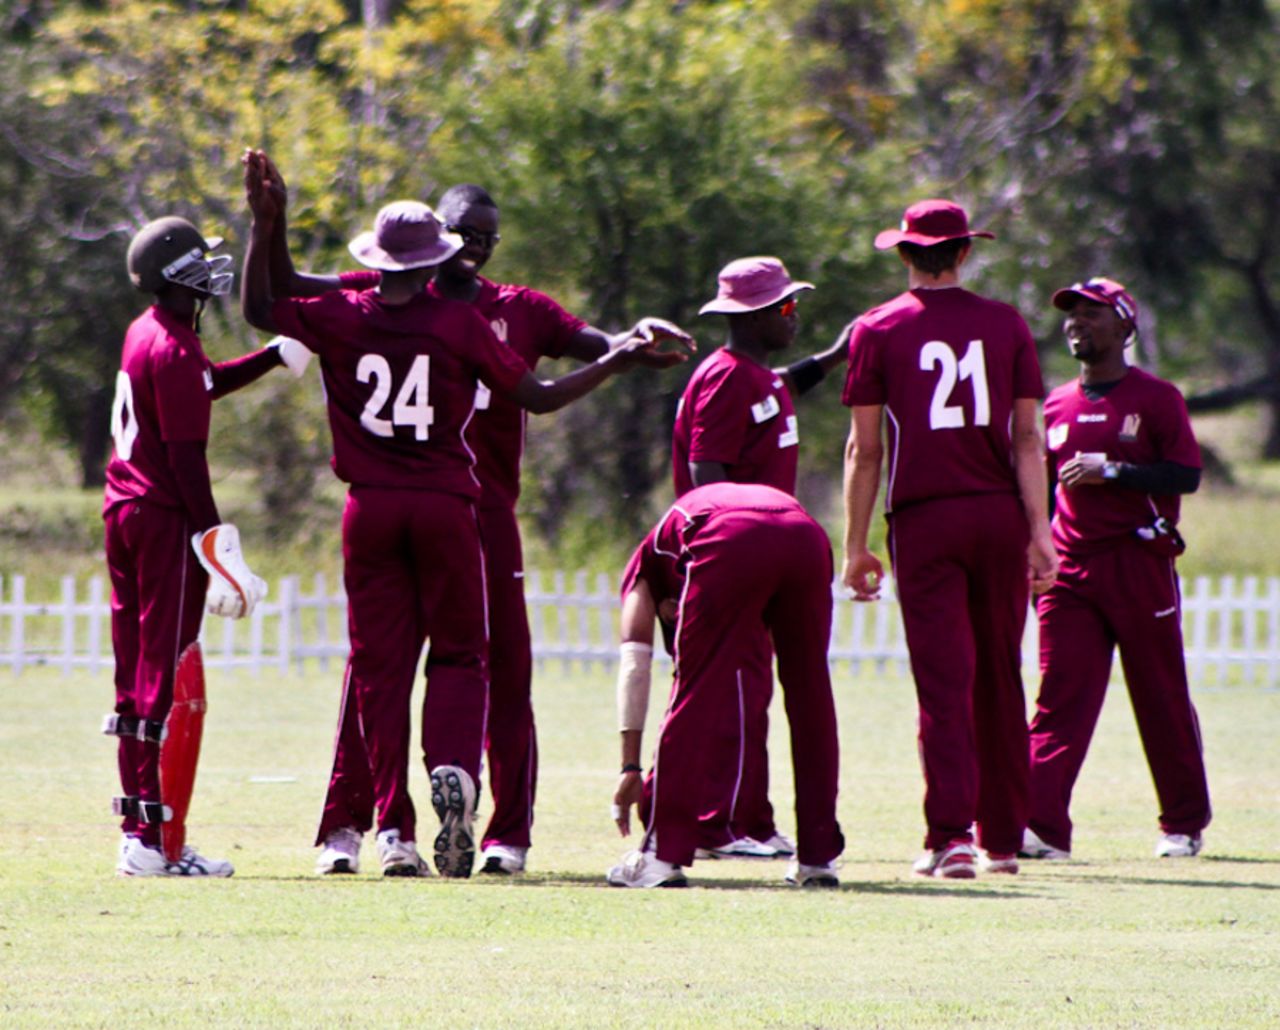 Southern Rocks celebrate a wicket the fall of a Matabeleland Tuskers wicket, Southern Rocks v Matabeleland Tuskers, MetBank Pro40 Championship, Masvingo, January 9, 2011